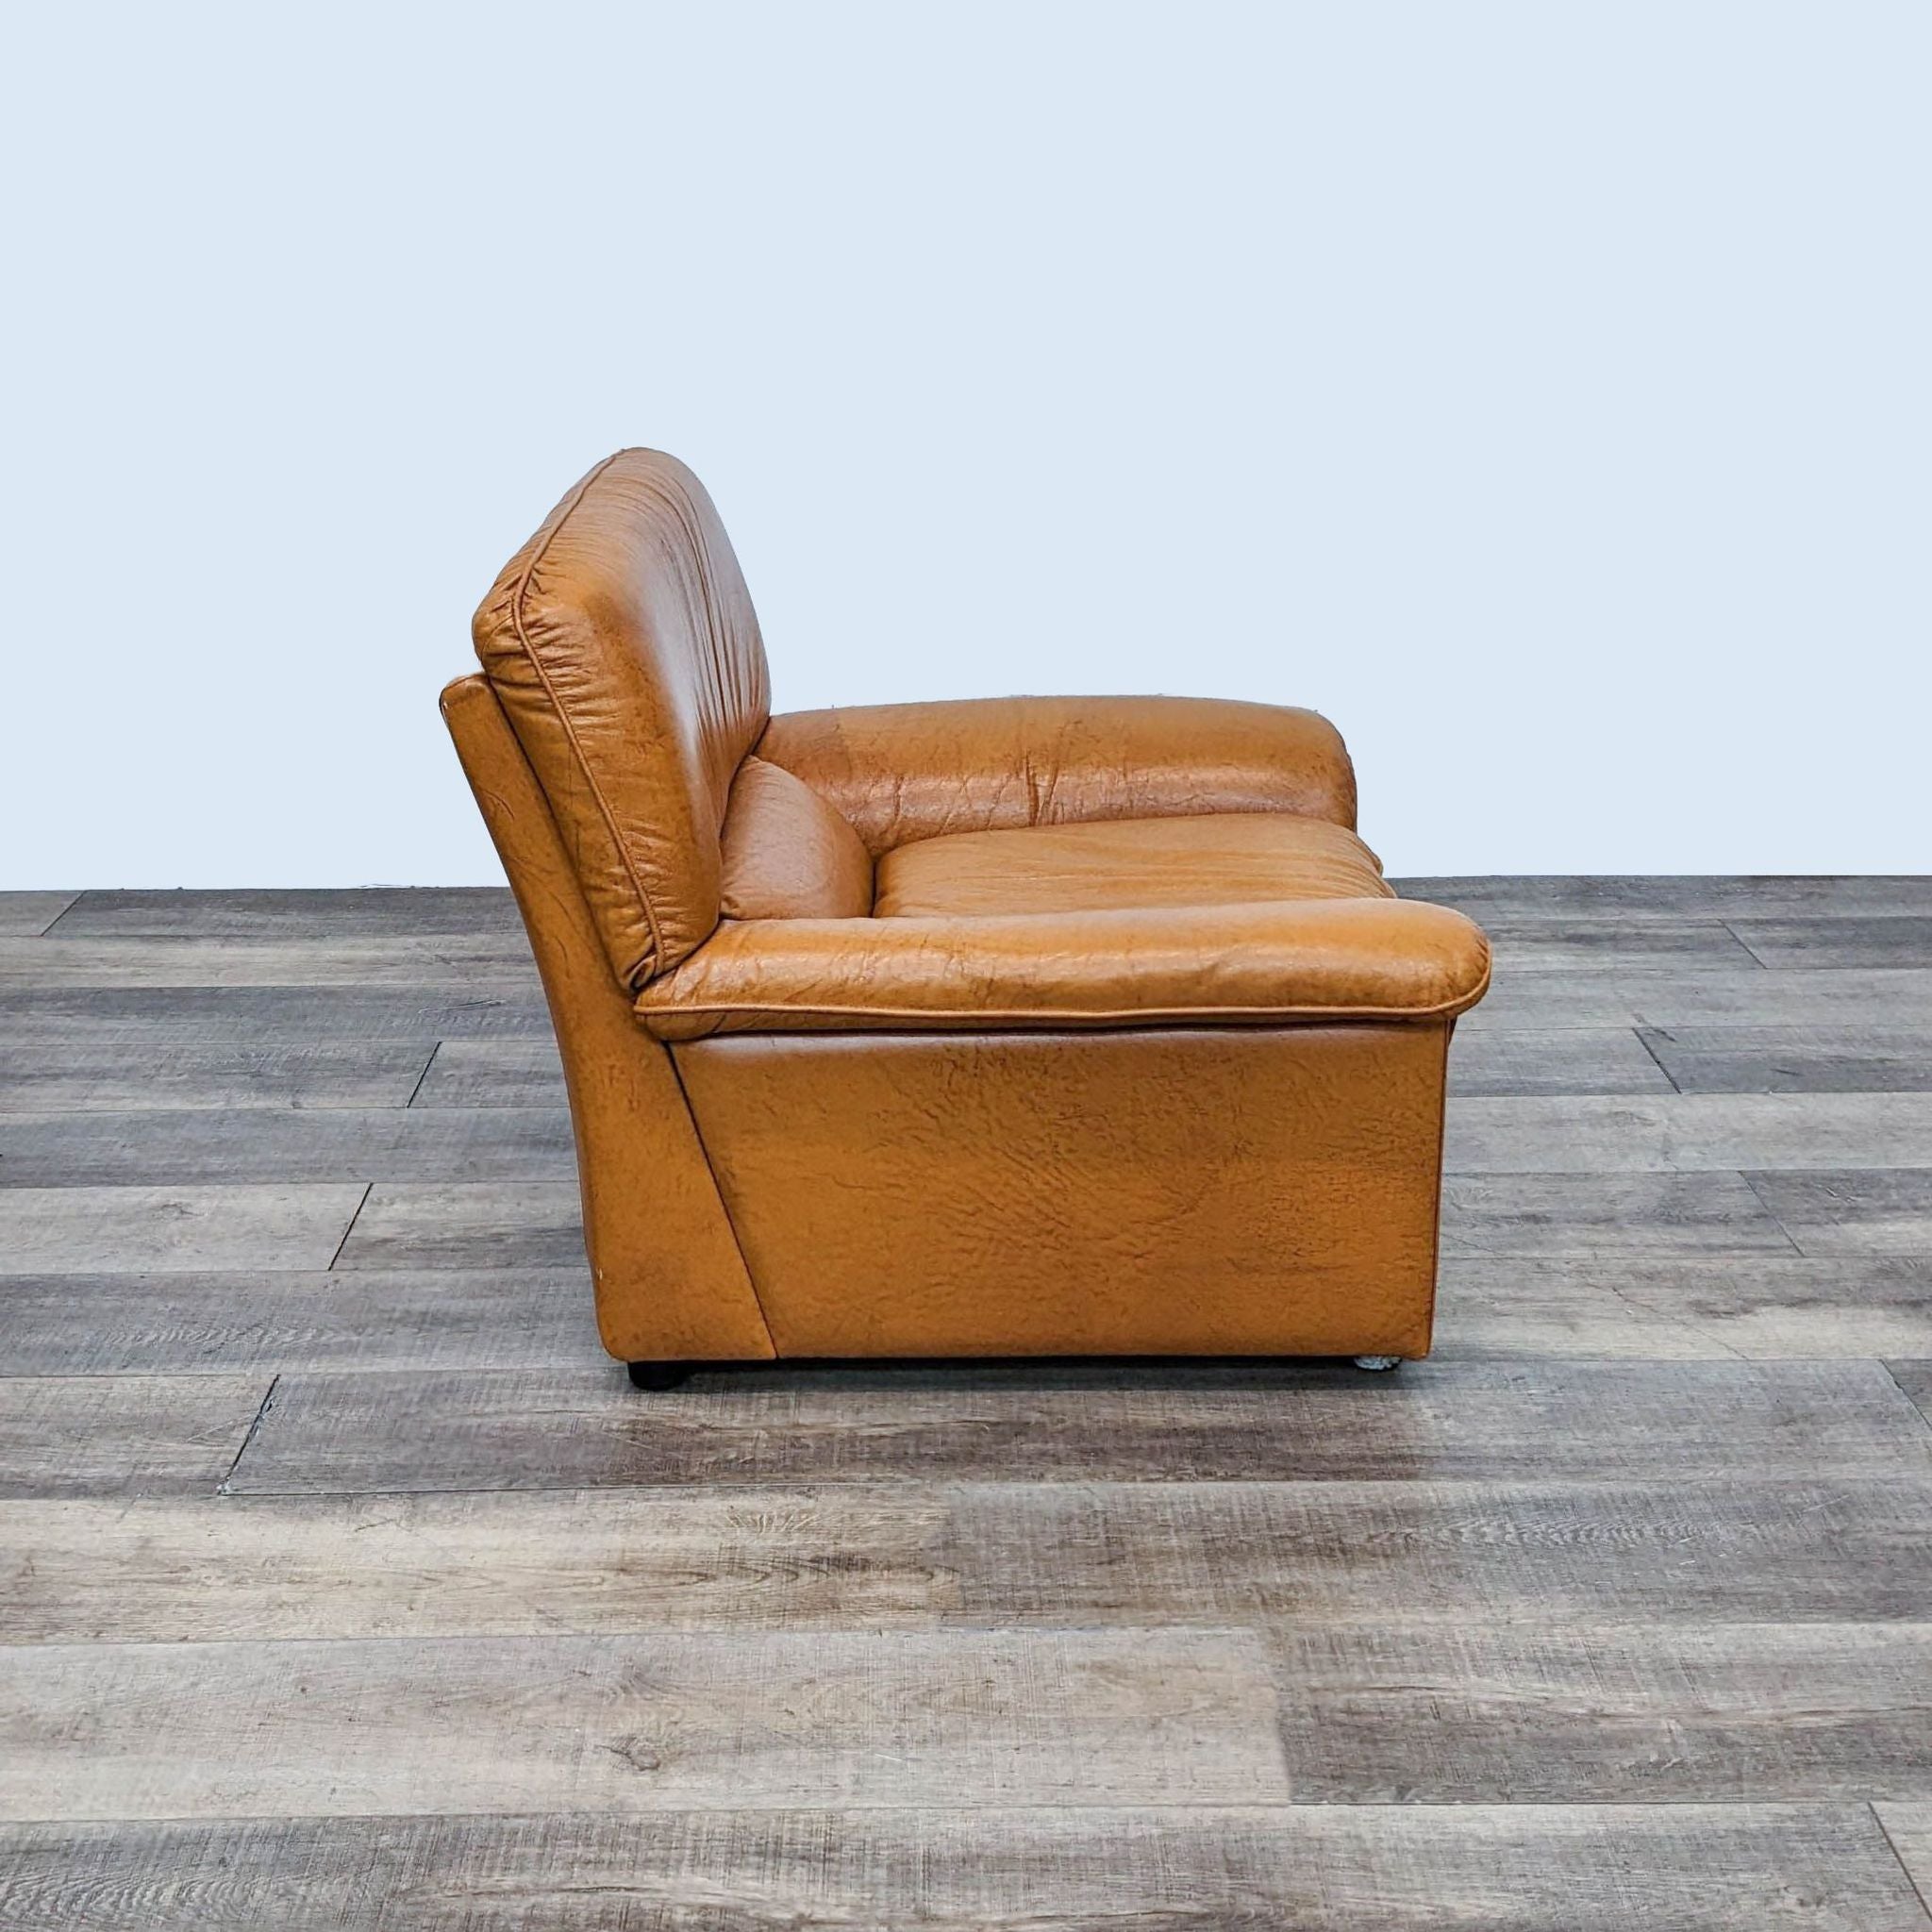 Contemporary Reperch lounge chair featuring a tan leather finish, comfortable padding, curved armrests, and wooden legs.